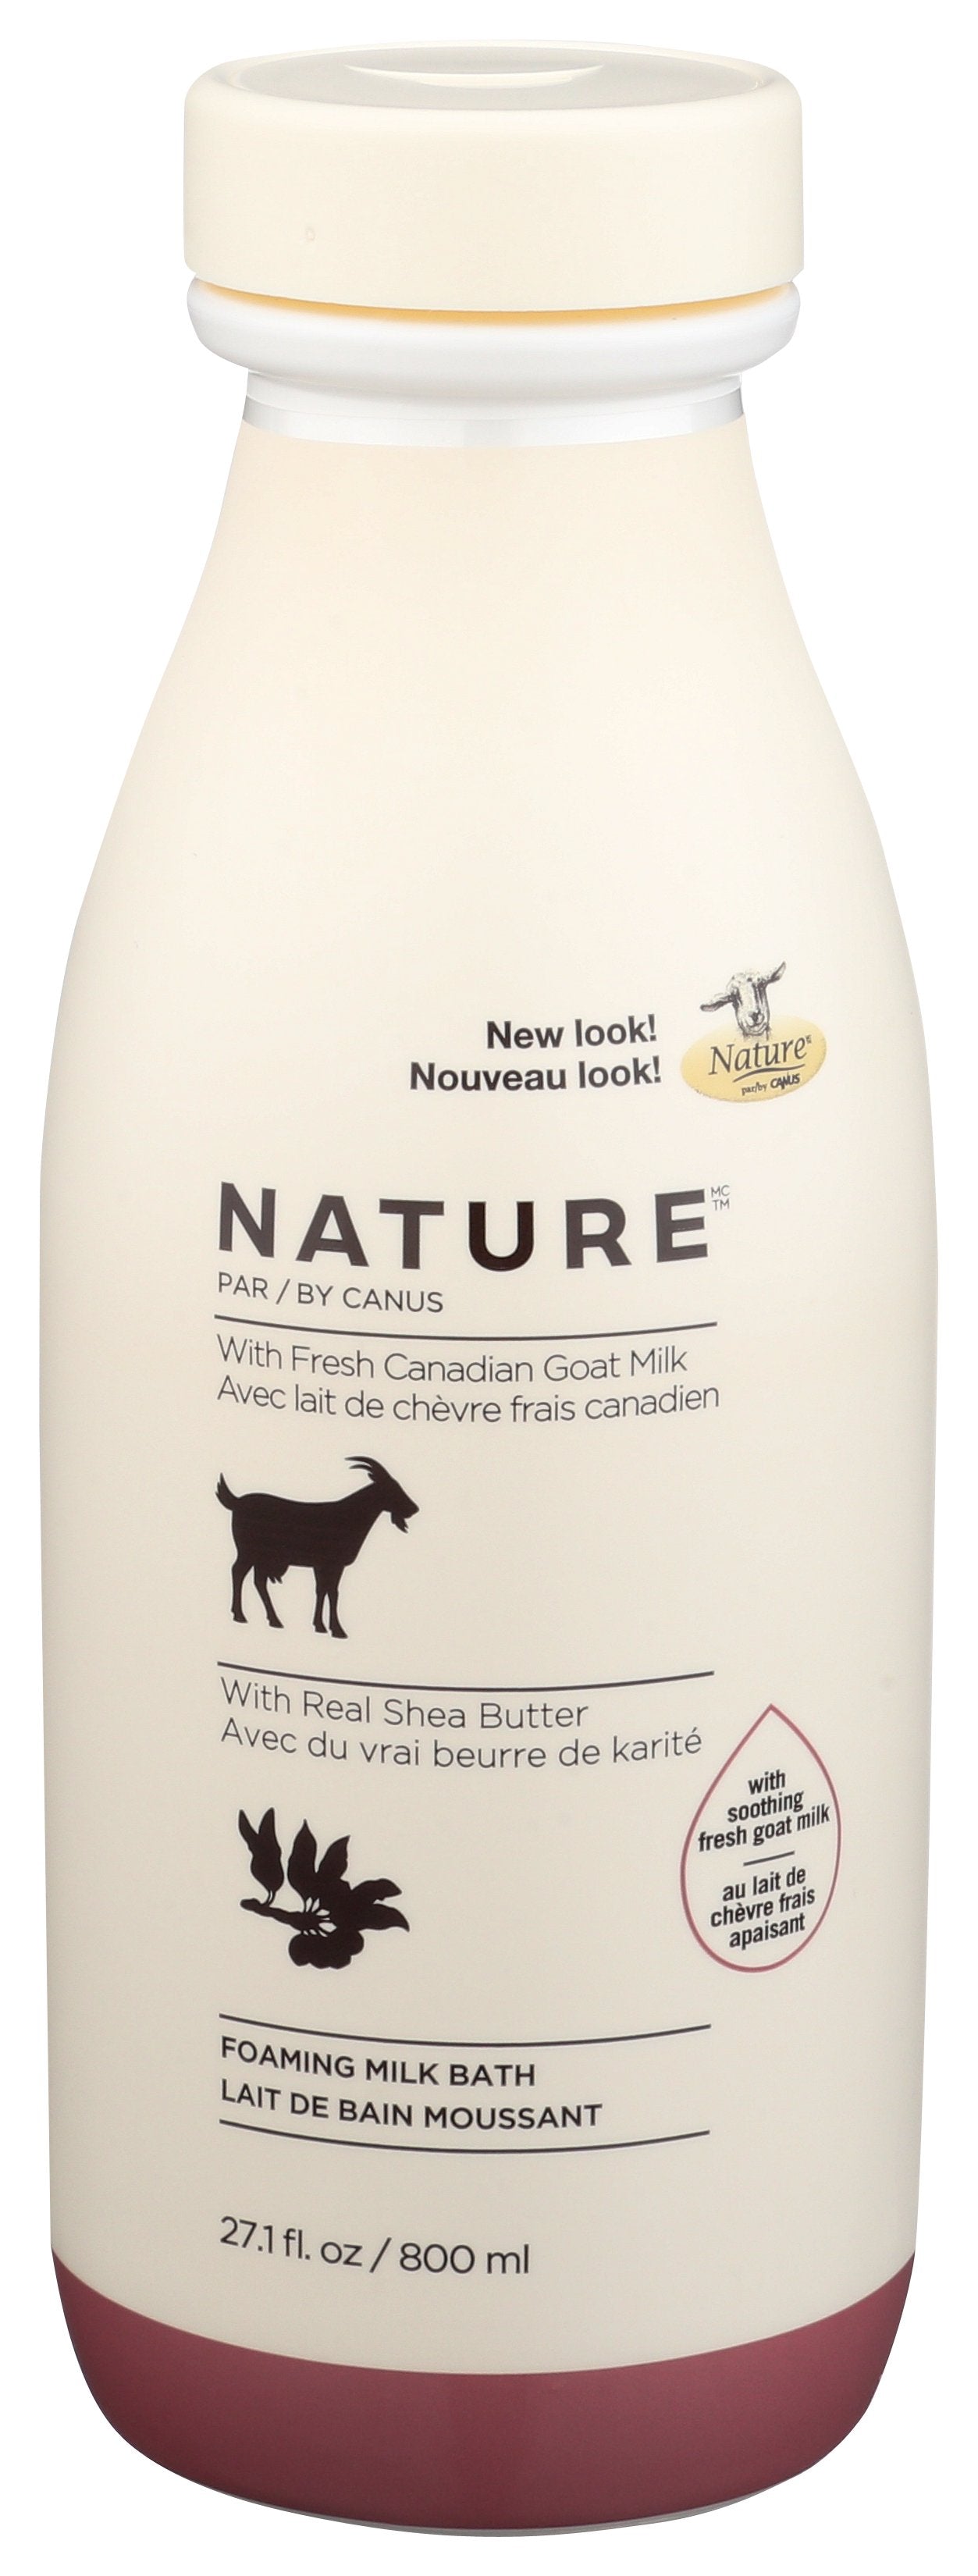 NATURE BY CANUS BATH FOAMING SH BTTR - Case of 3